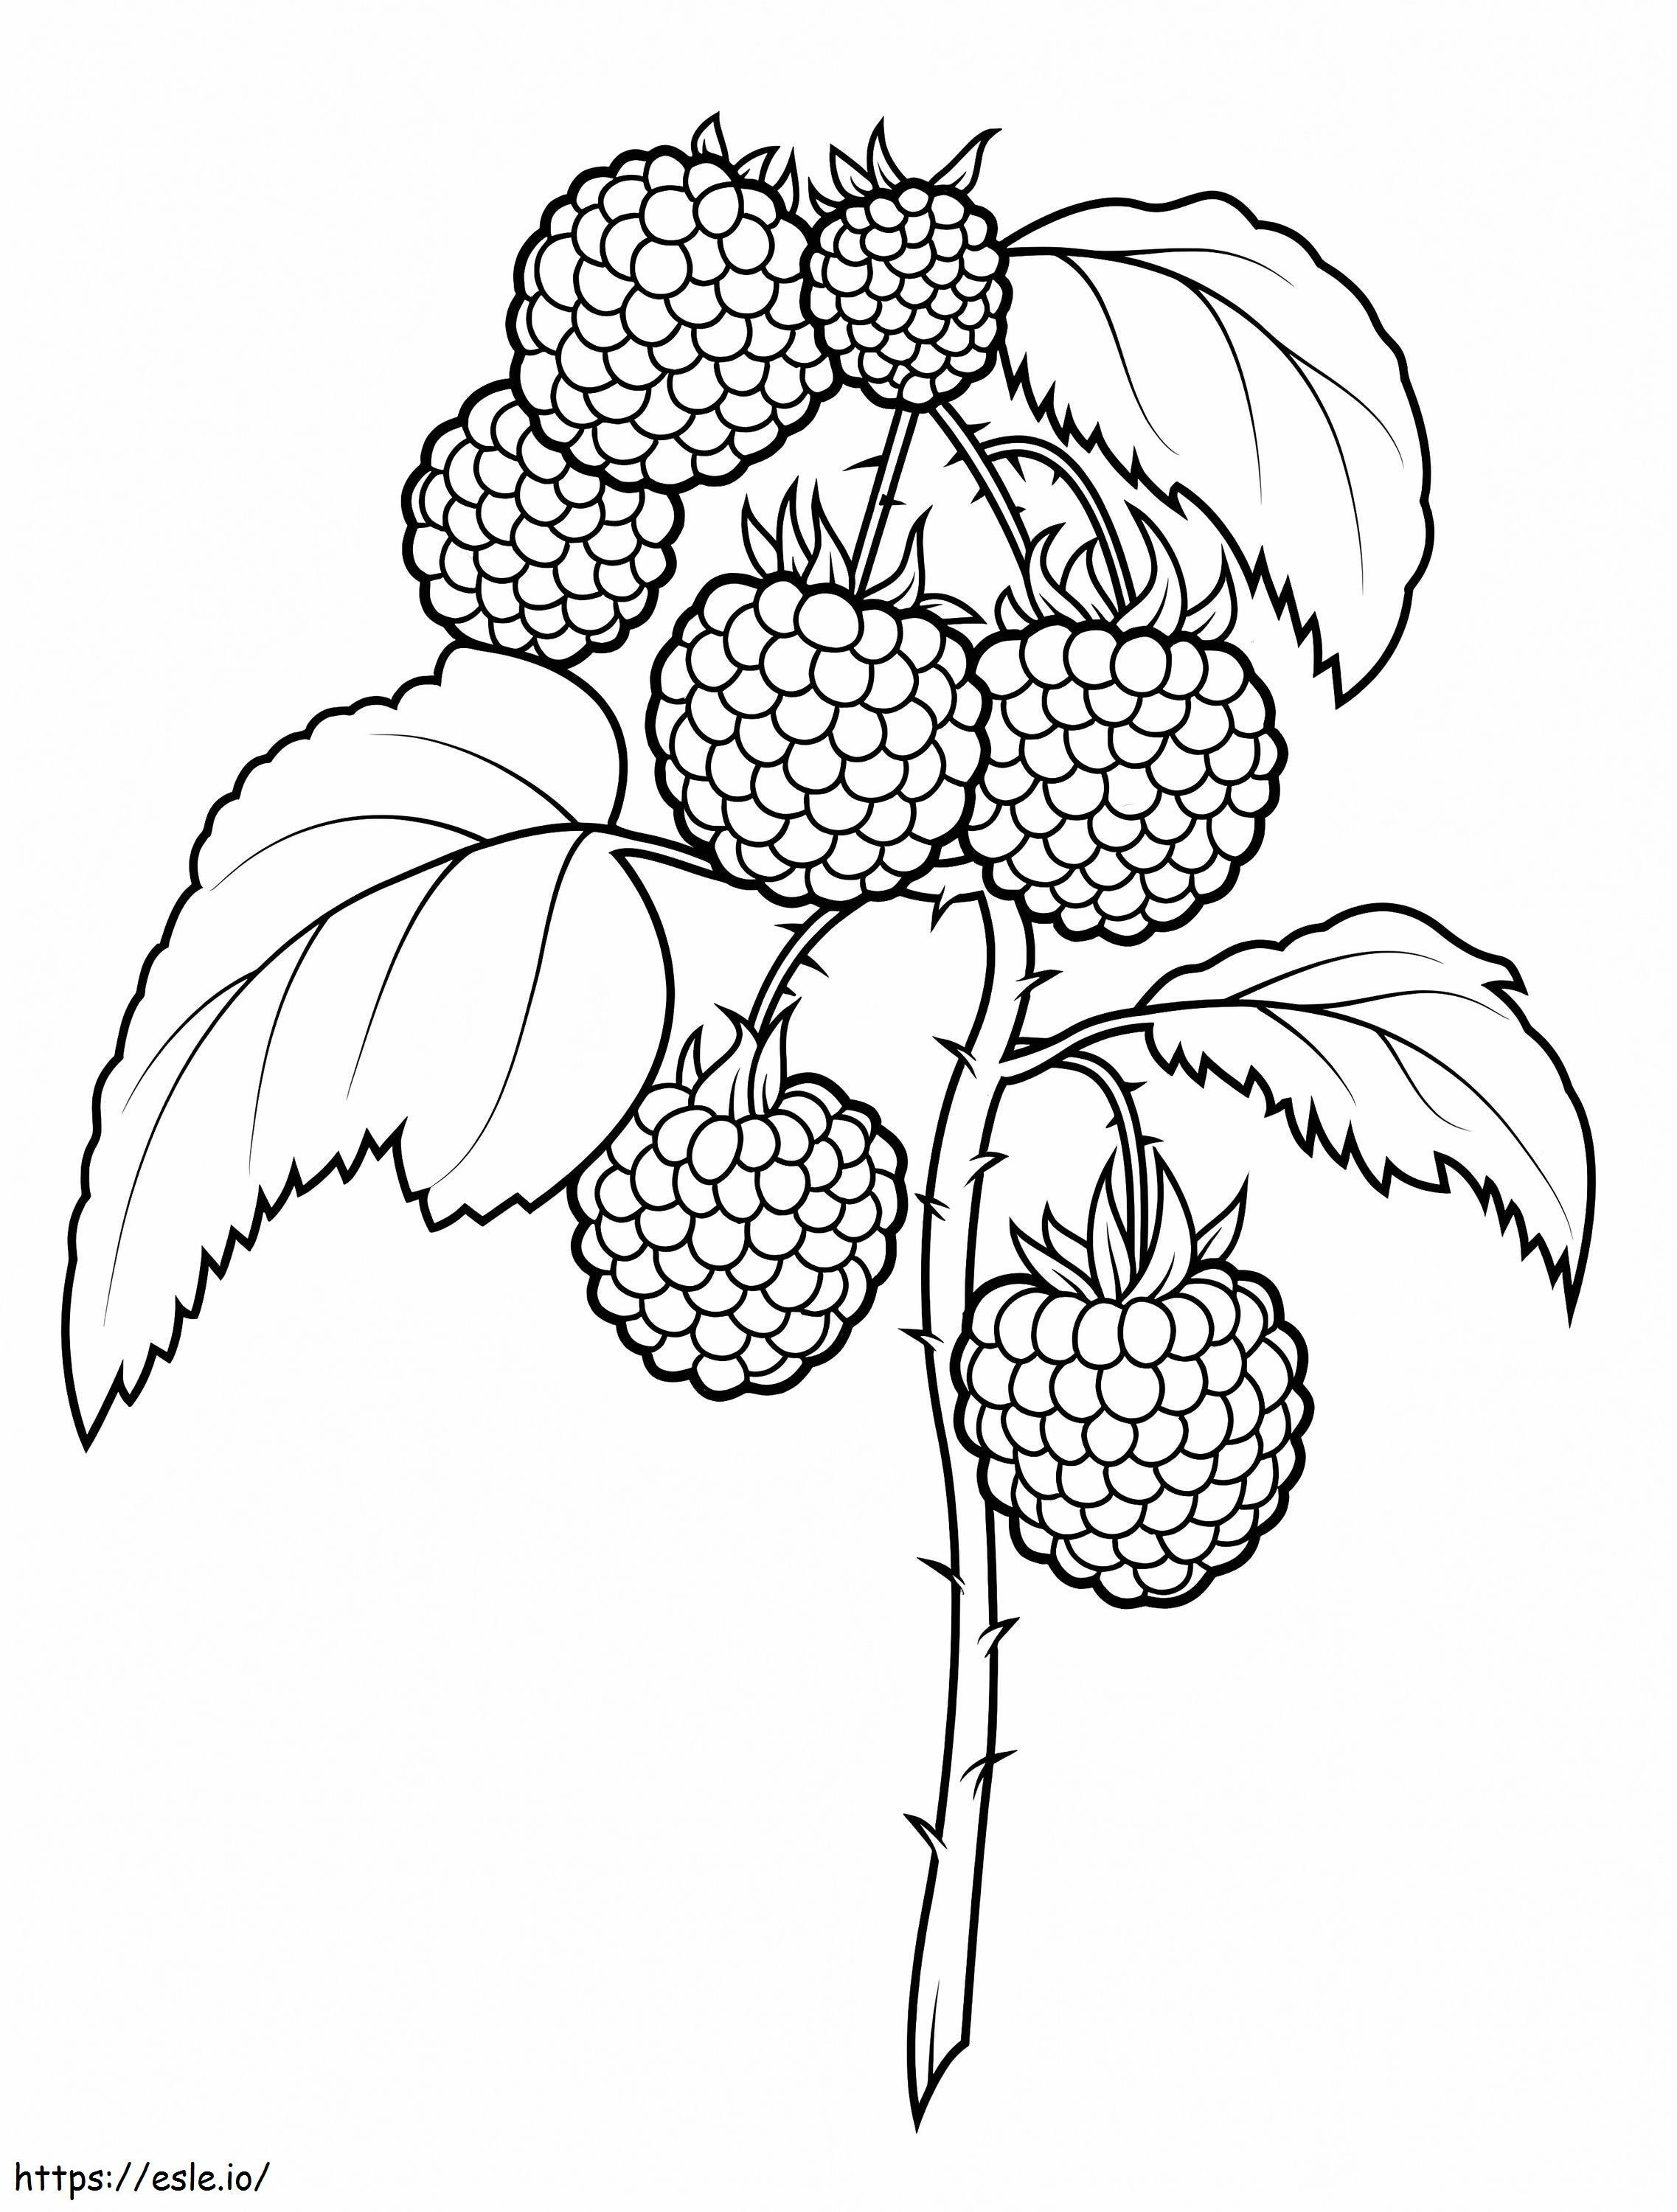 Mulberry Tree coloring page